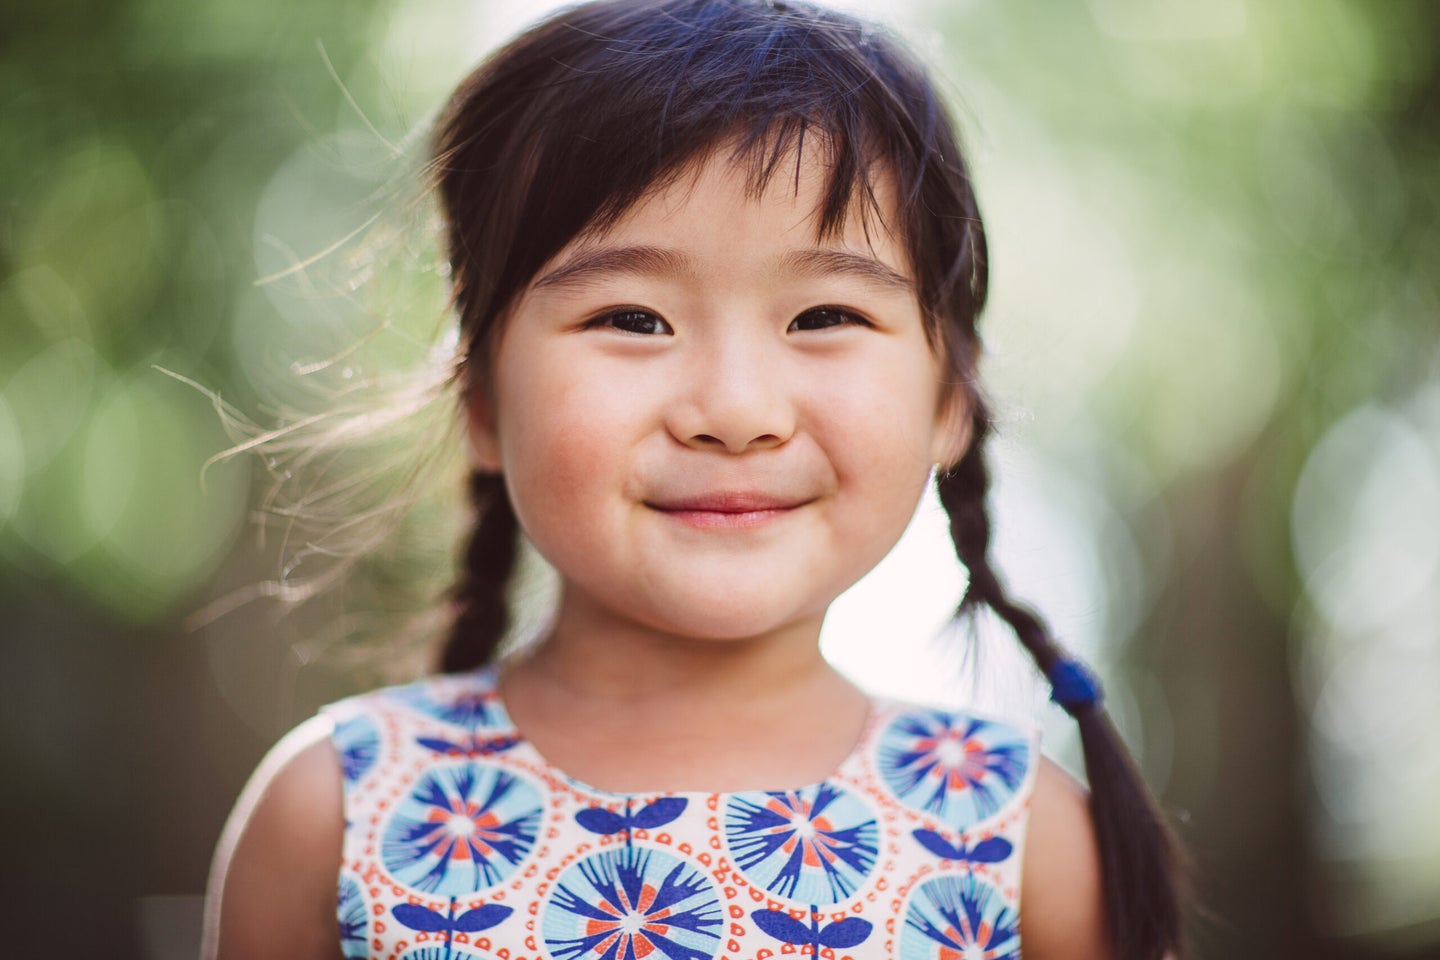 A child smiling with an out of focus background.